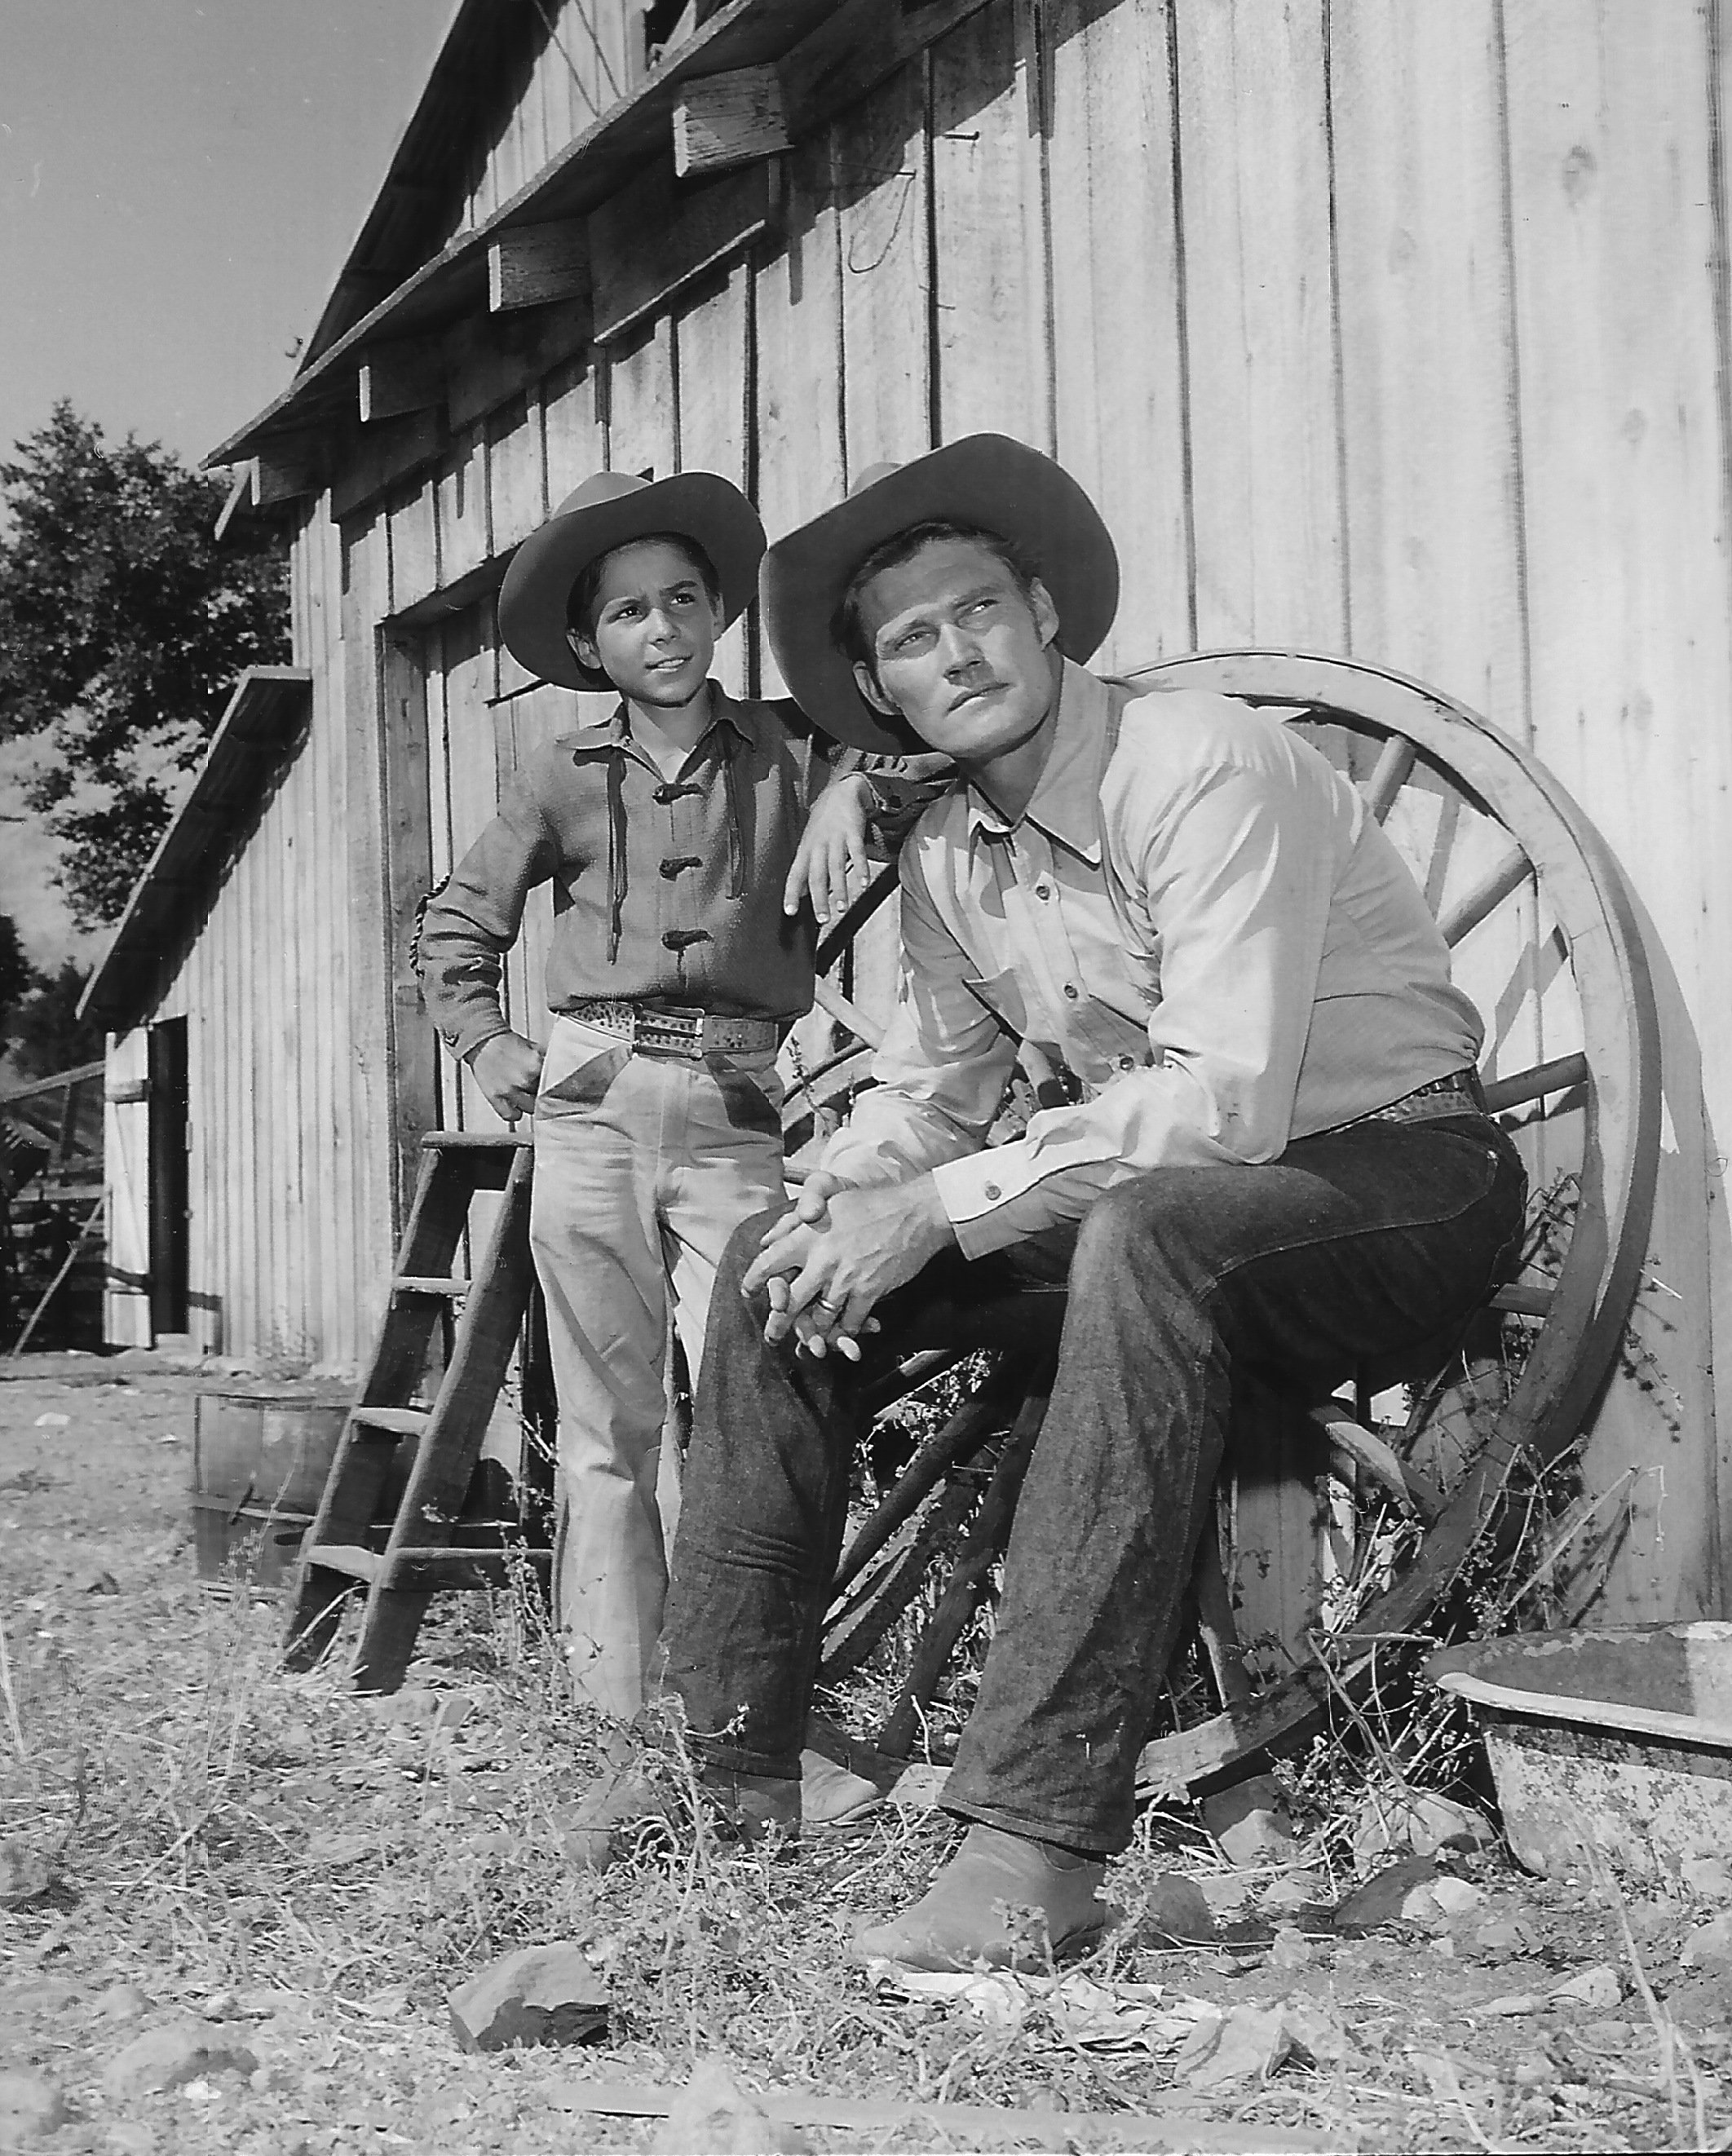 Connors and Crawford at 20th Century Fox Ranch (now known as Malibu Creek State Park) in 1958.